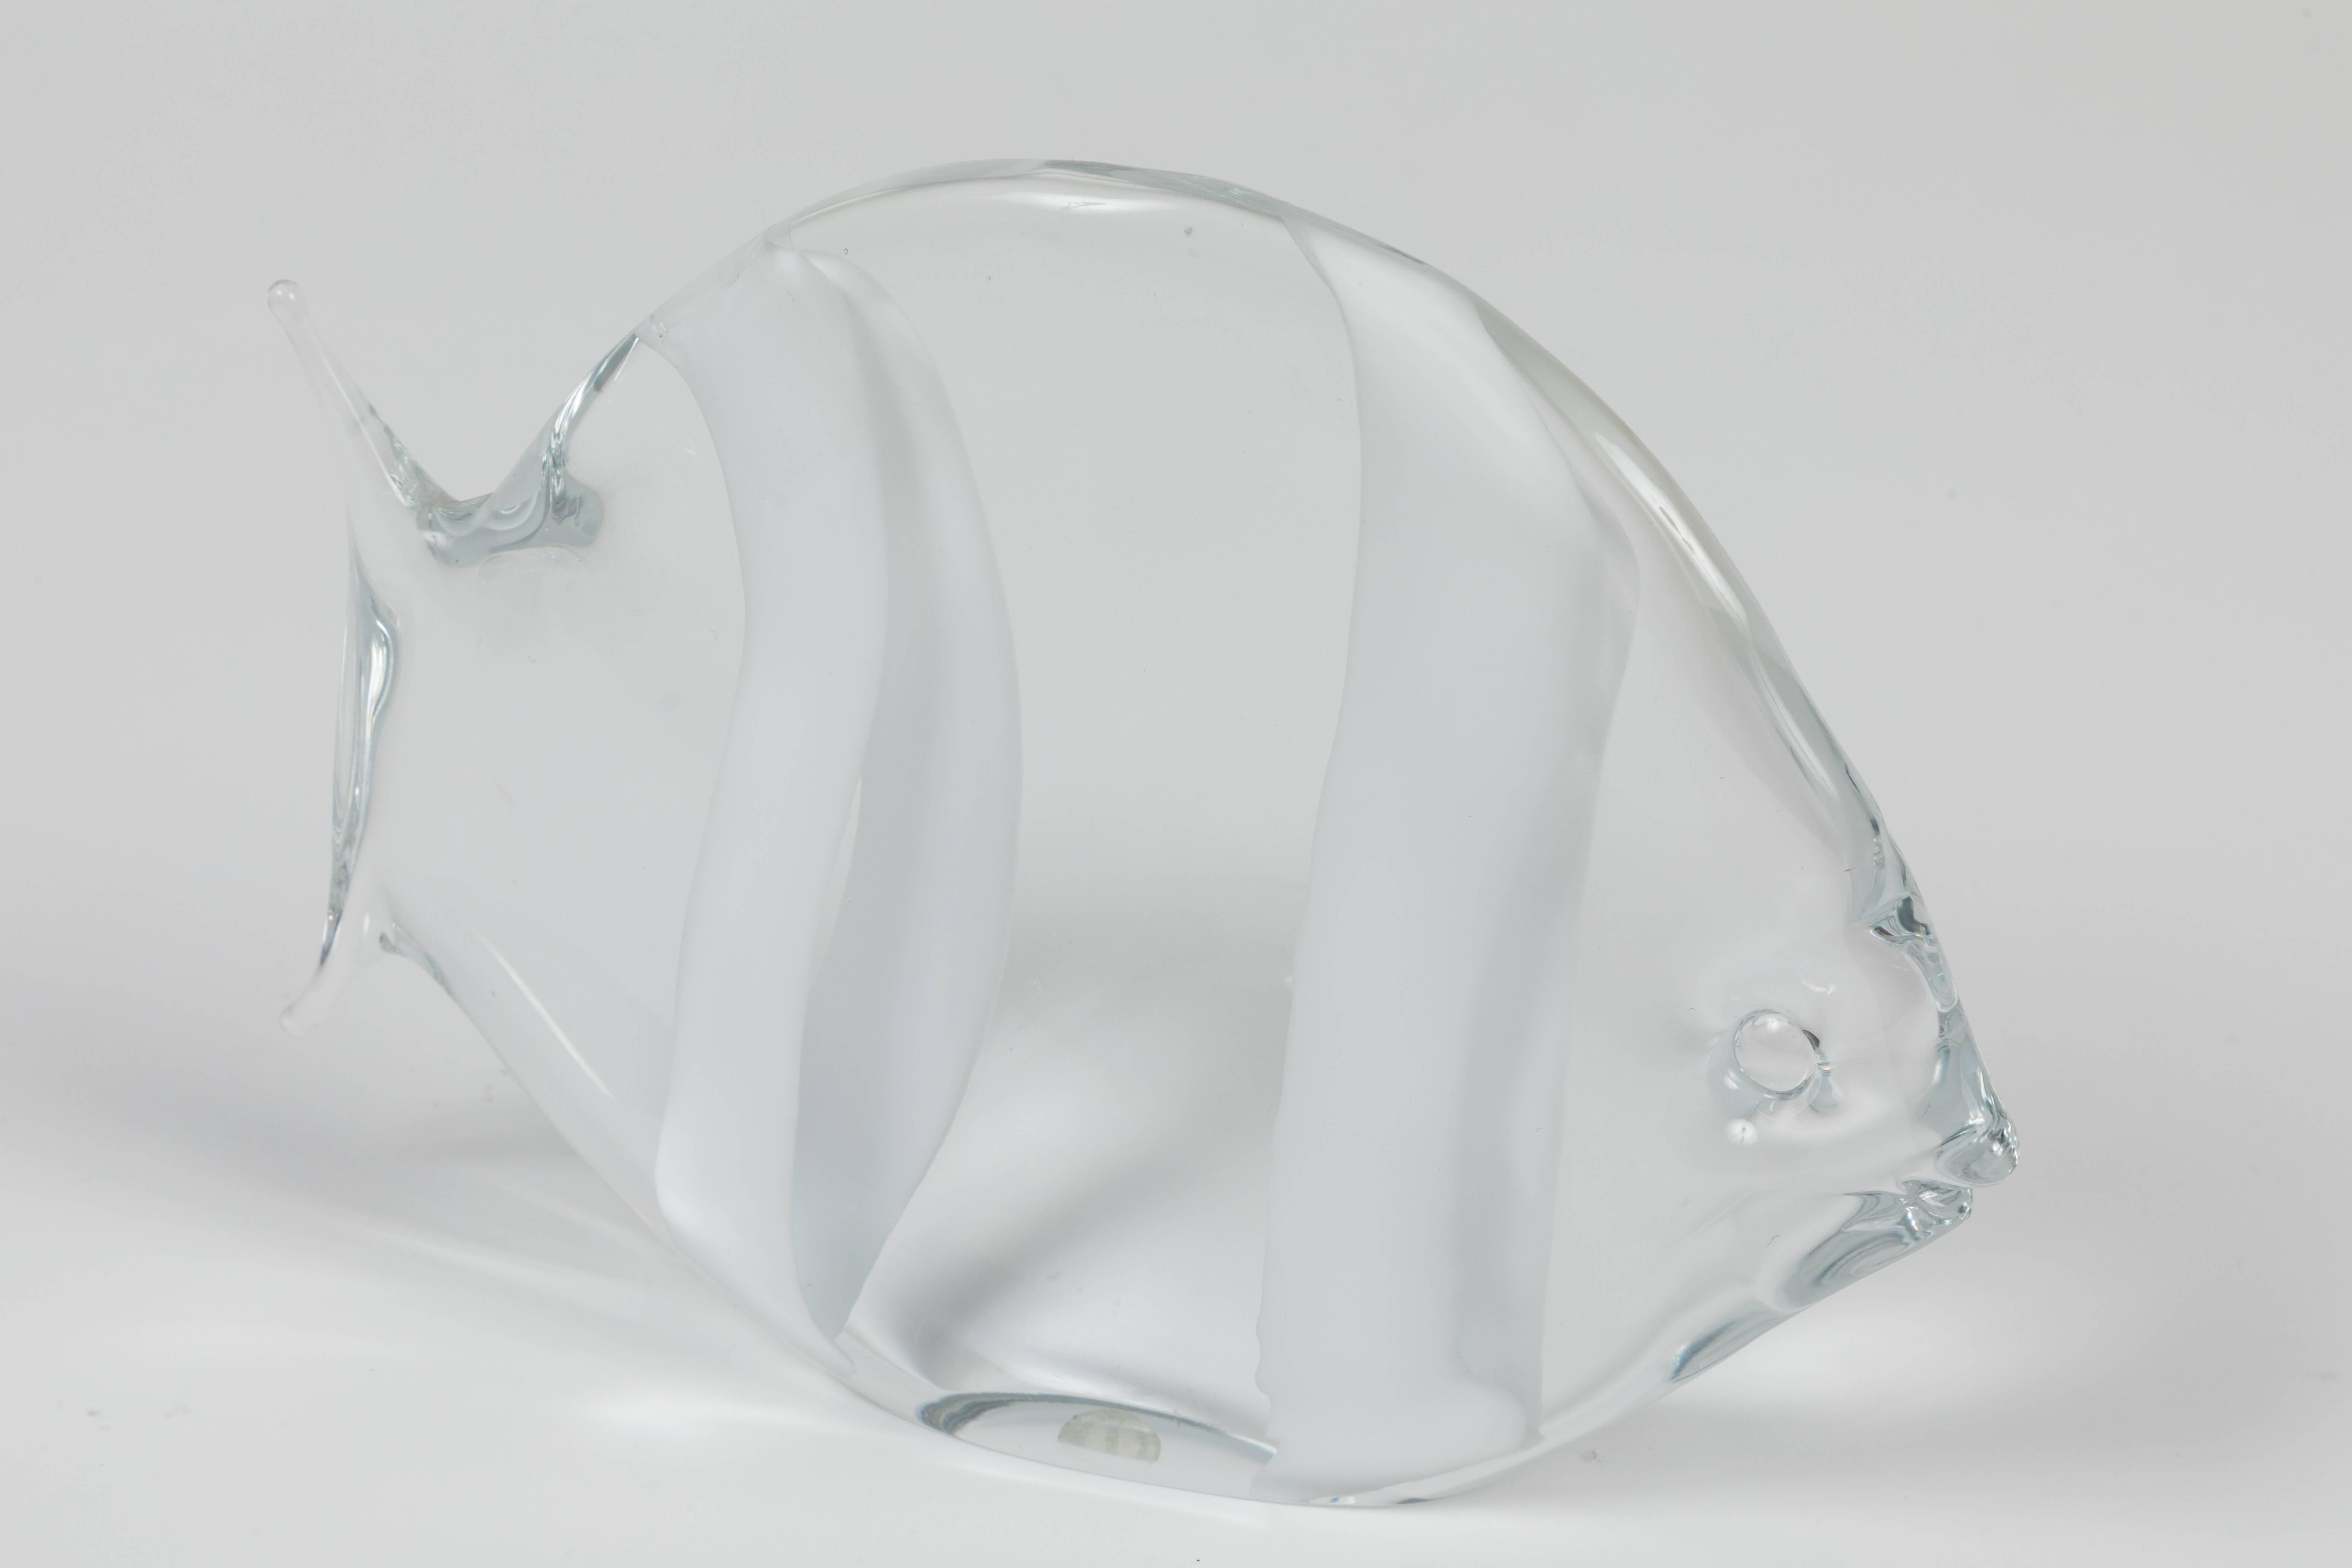 A charming vintage fish-shaped Murano glass sculpture by Archimede Seguso in clear glass with two white stripes. Signed with an acetate label.

About the artist: Archimede Seguso was an Italian glass manufacturer known for his intricate glass vases,